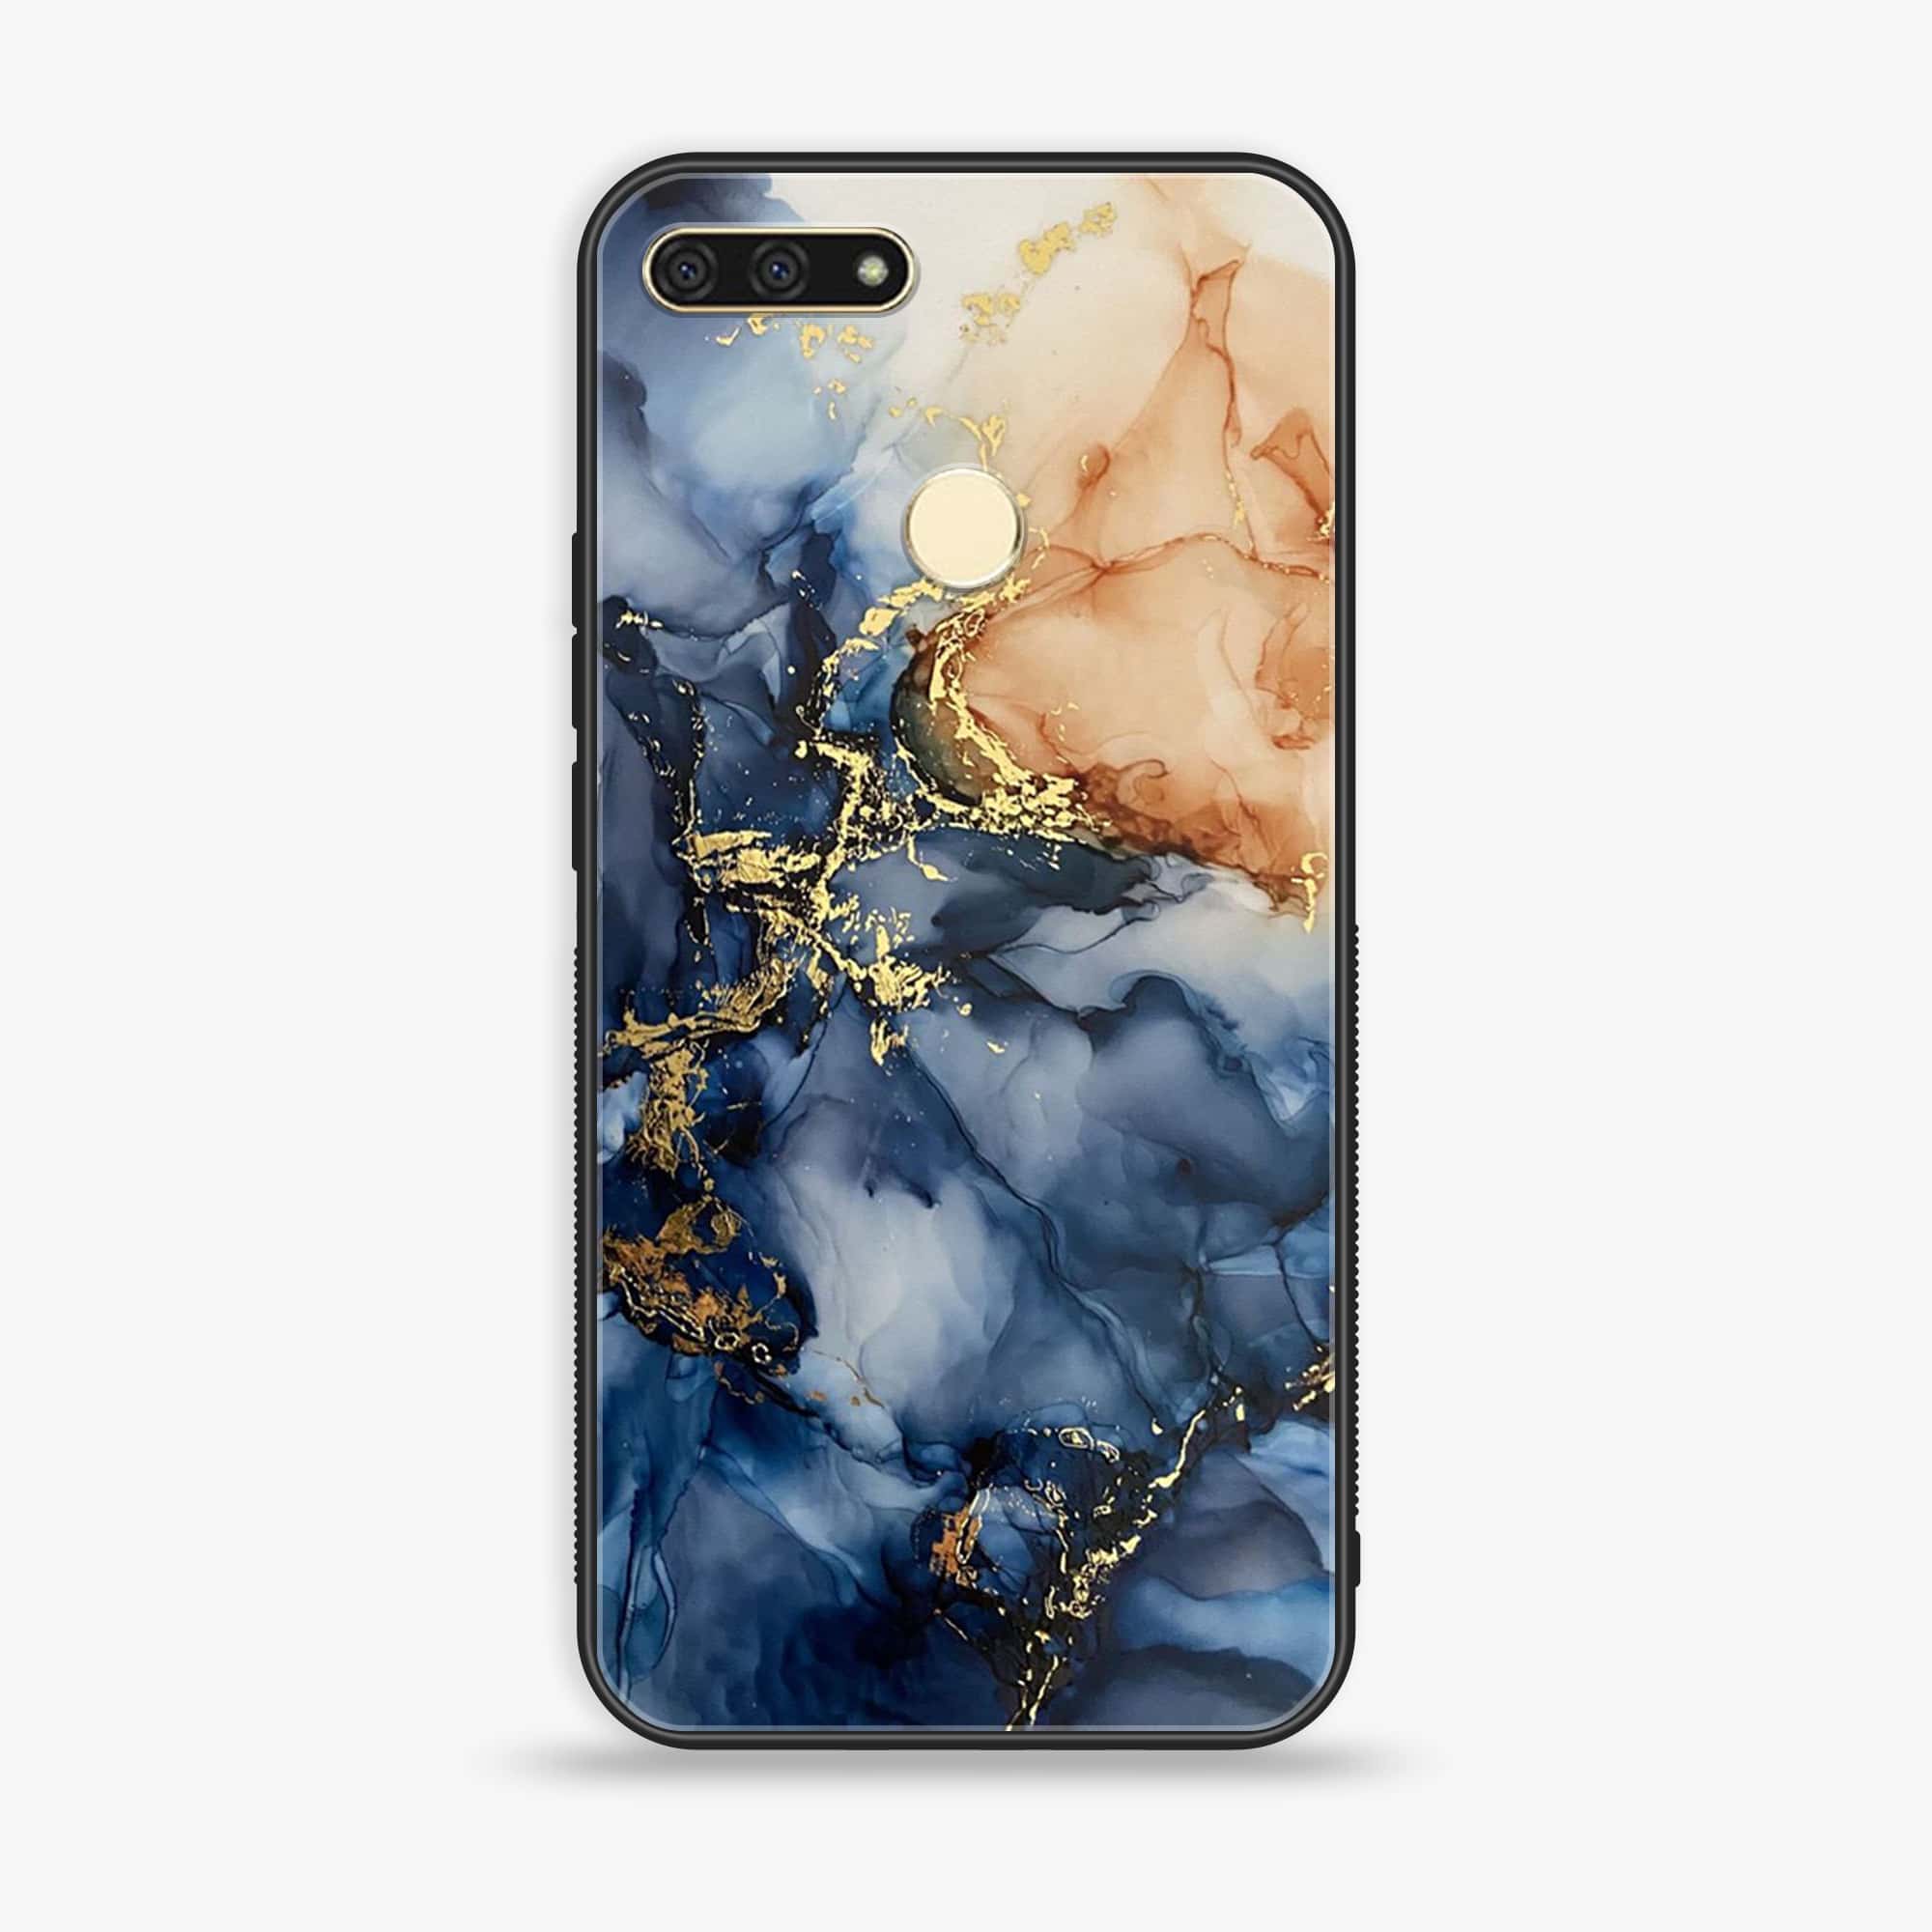 Huawei Y6 2018/Honor Play 7A - Blue Marble Series - Premium Printed Glass soft Bumper shock Proof Case